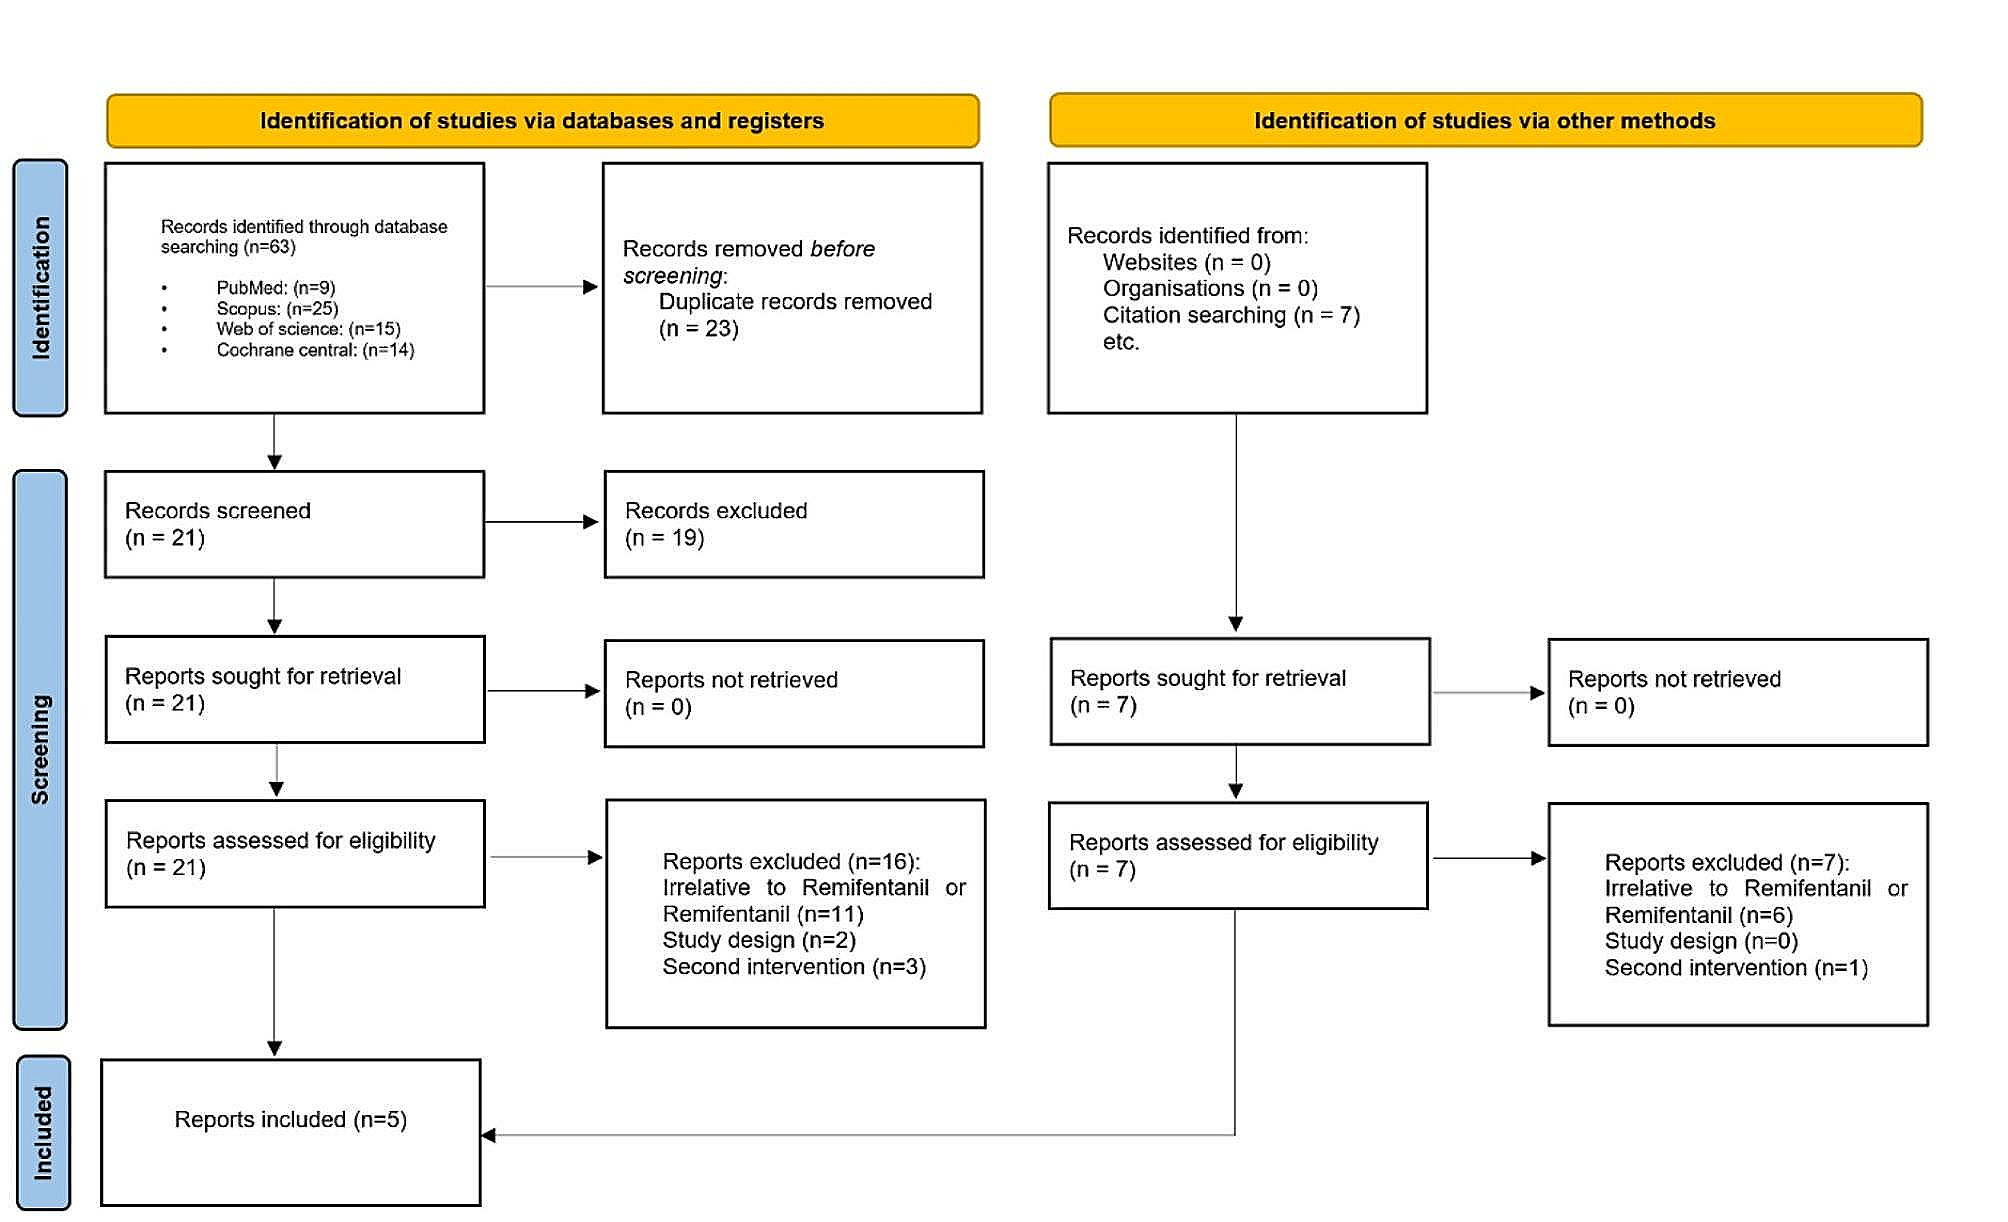 Dexmedetomidine versus remifentanil in nasal surgery: a systematic review and meta-analysis